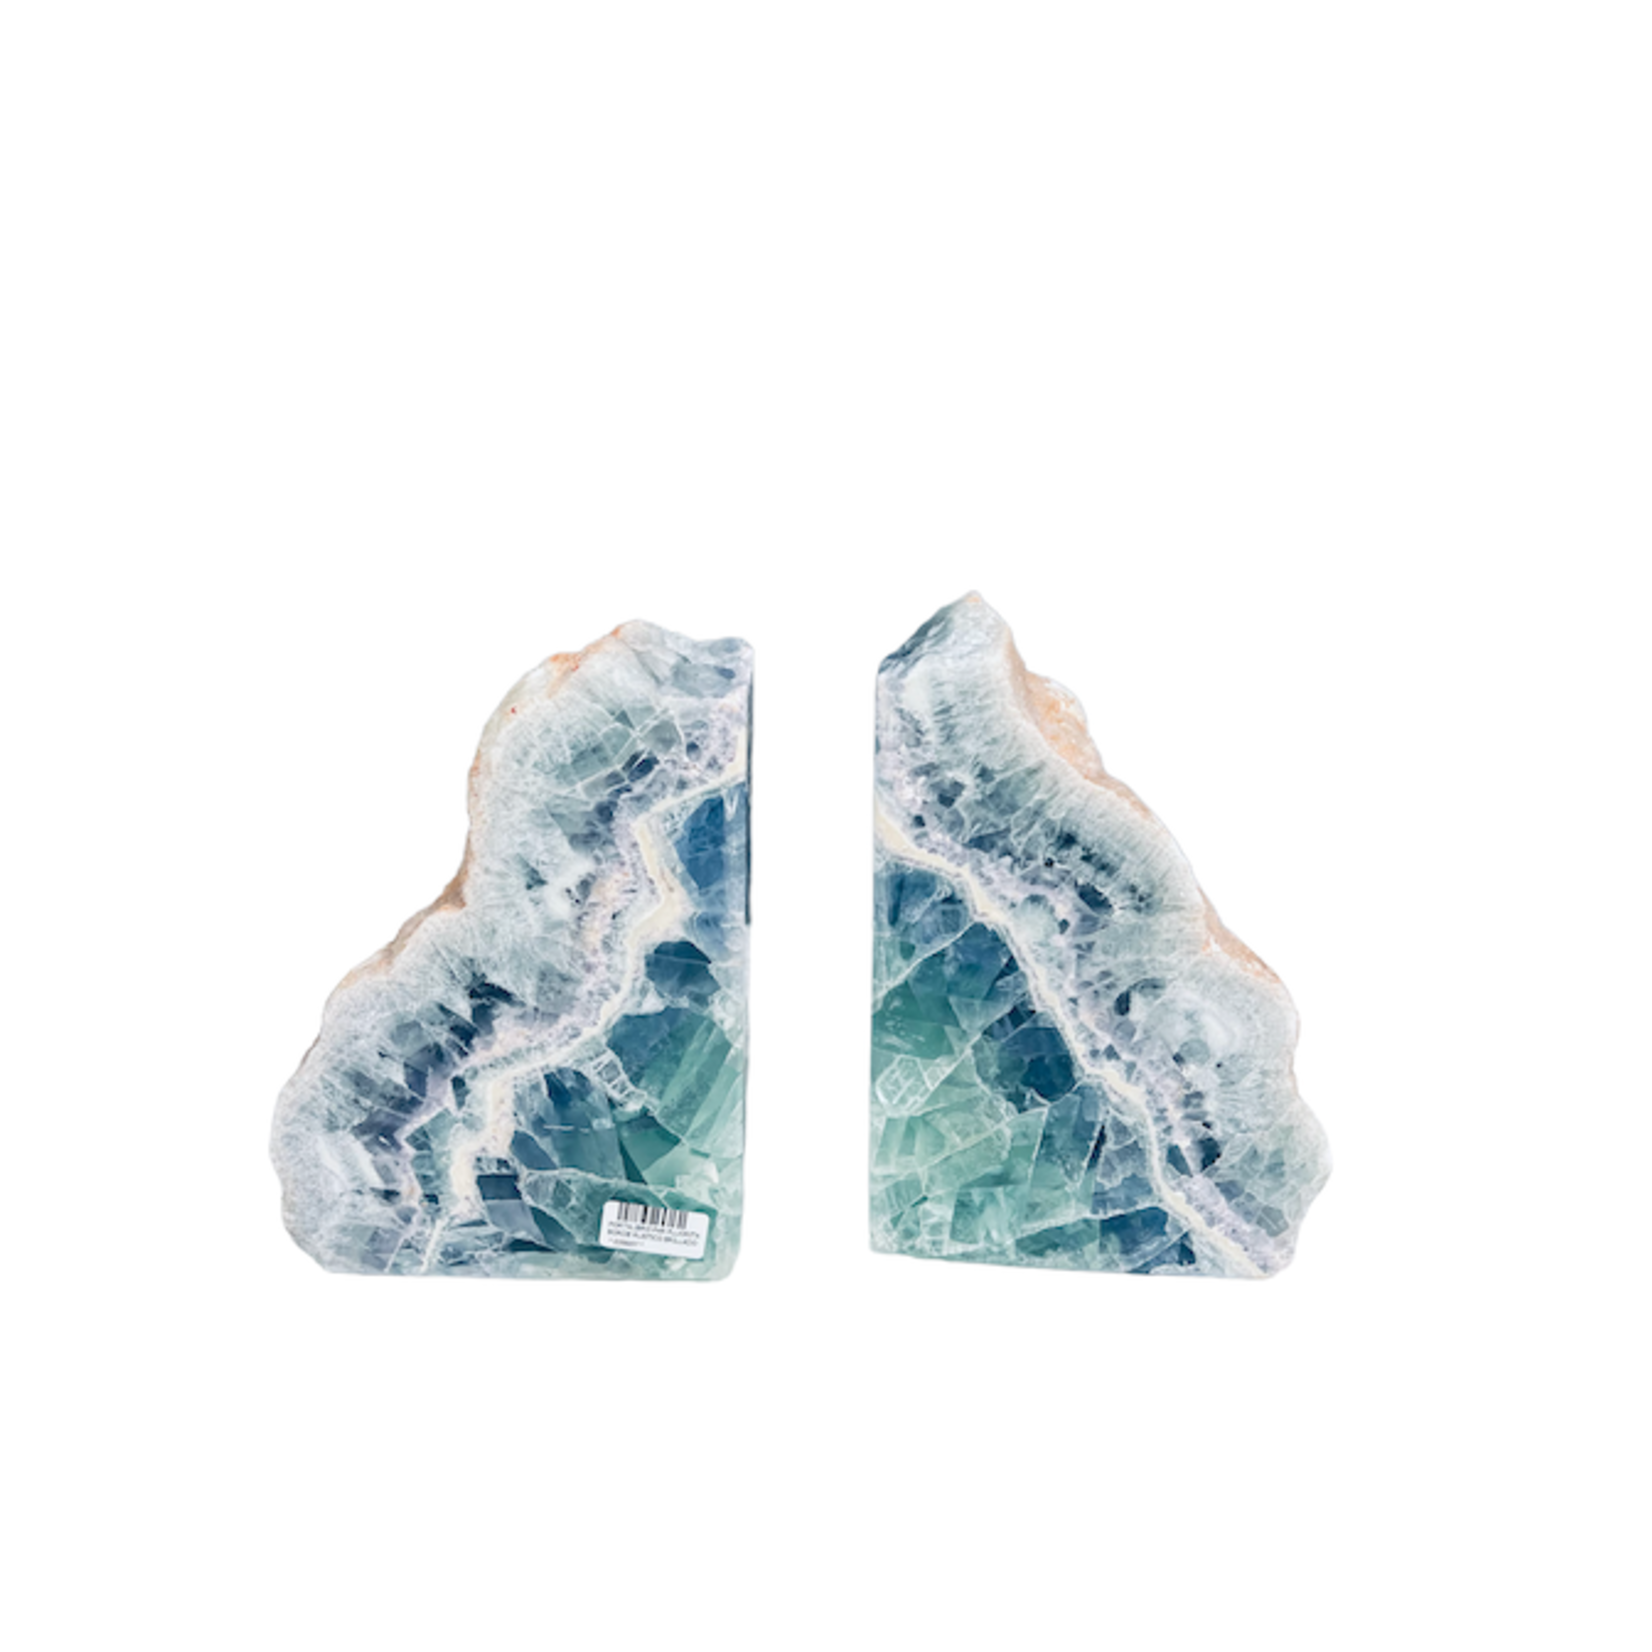 Outside The Box 6" Handcrafted Natural Fluorite Bookend Rustic Edge